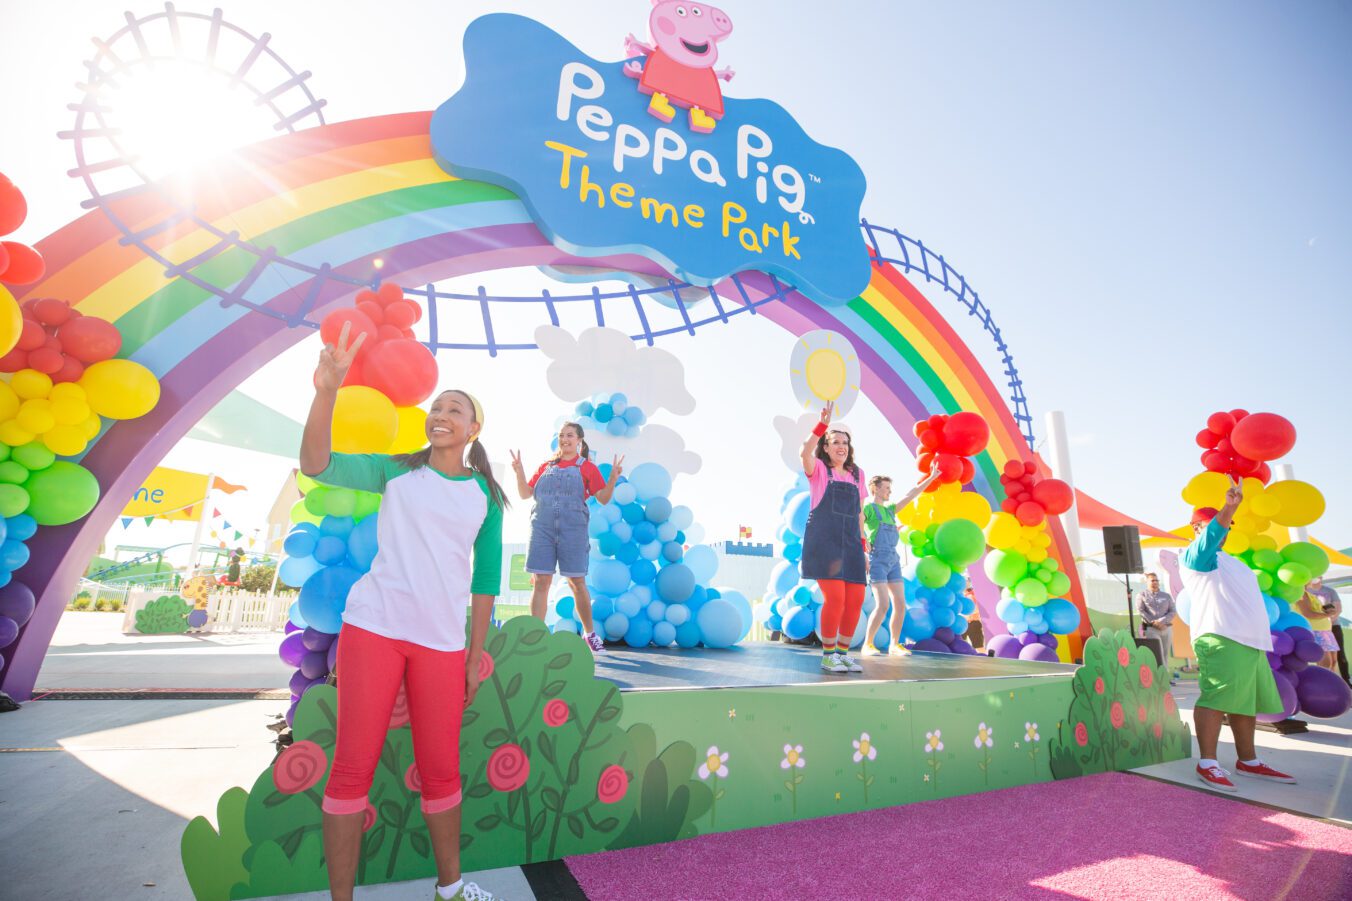 Cast and Characters dance, sing, and entertain guests on the colorful stage